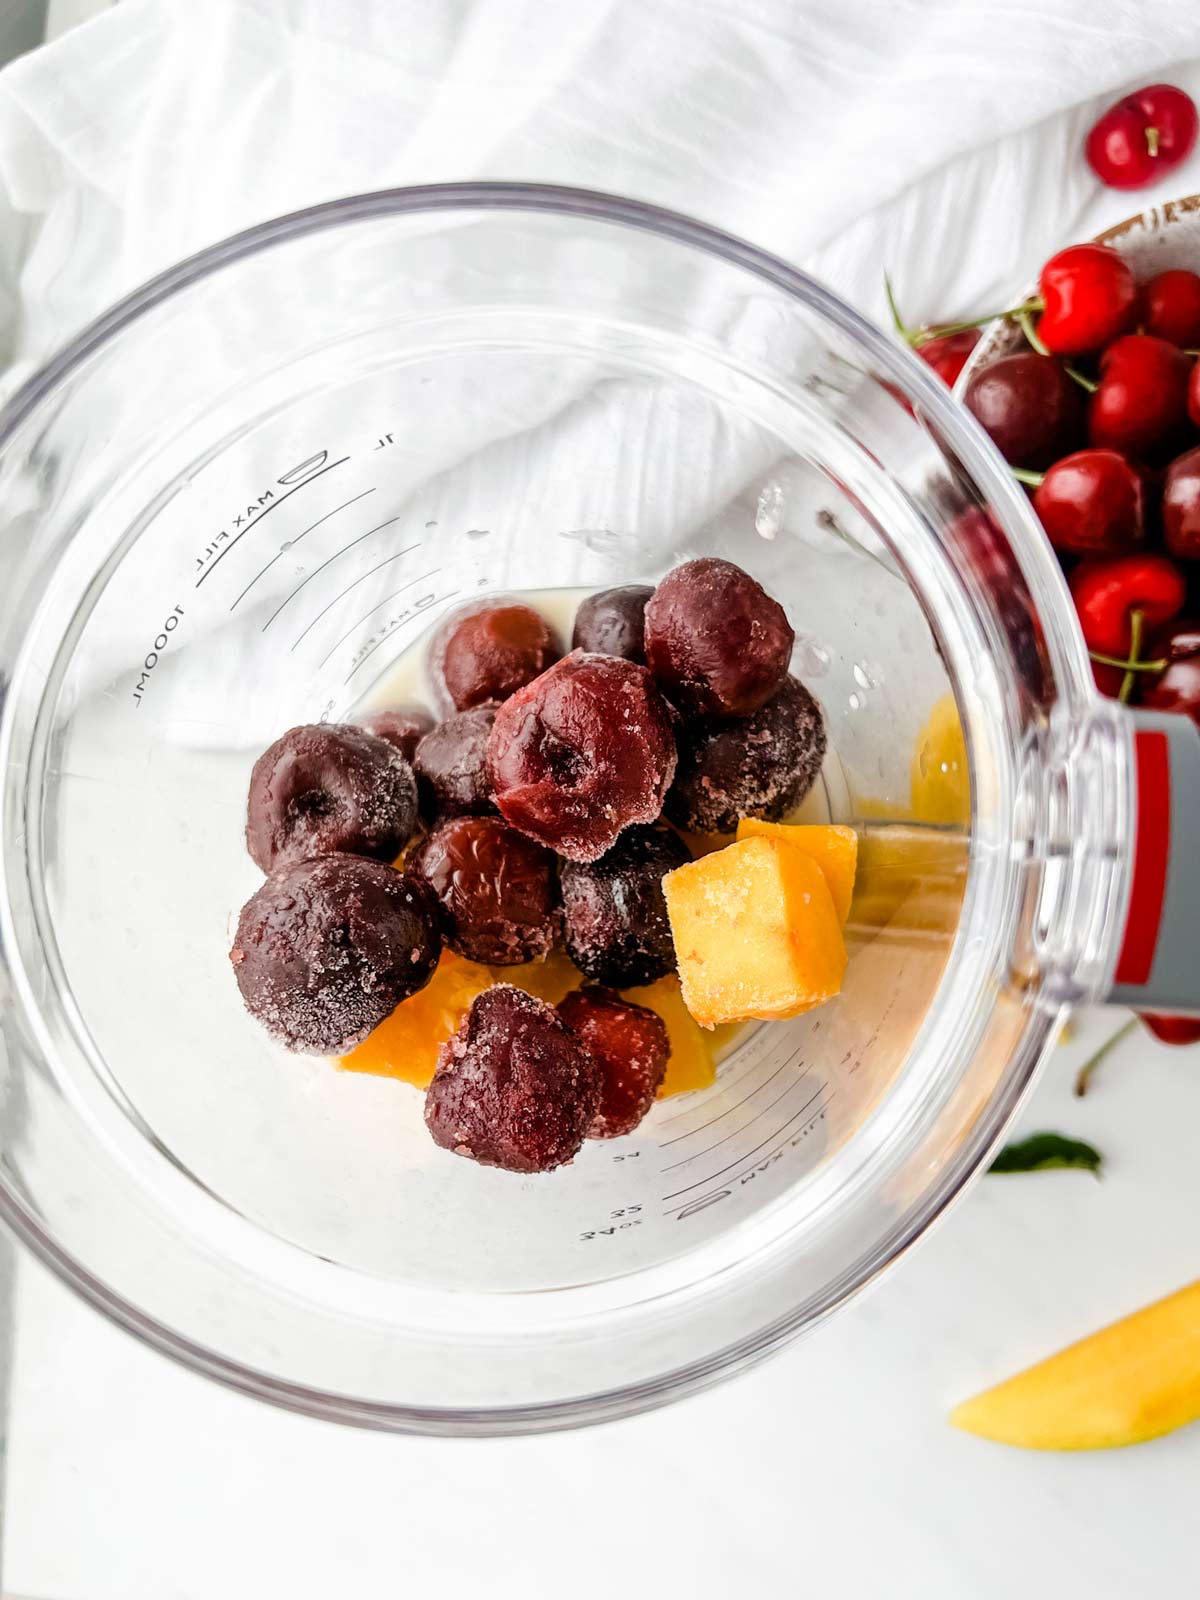 A blender with the ingredients for a cherry mango smoothie in it ready to process.